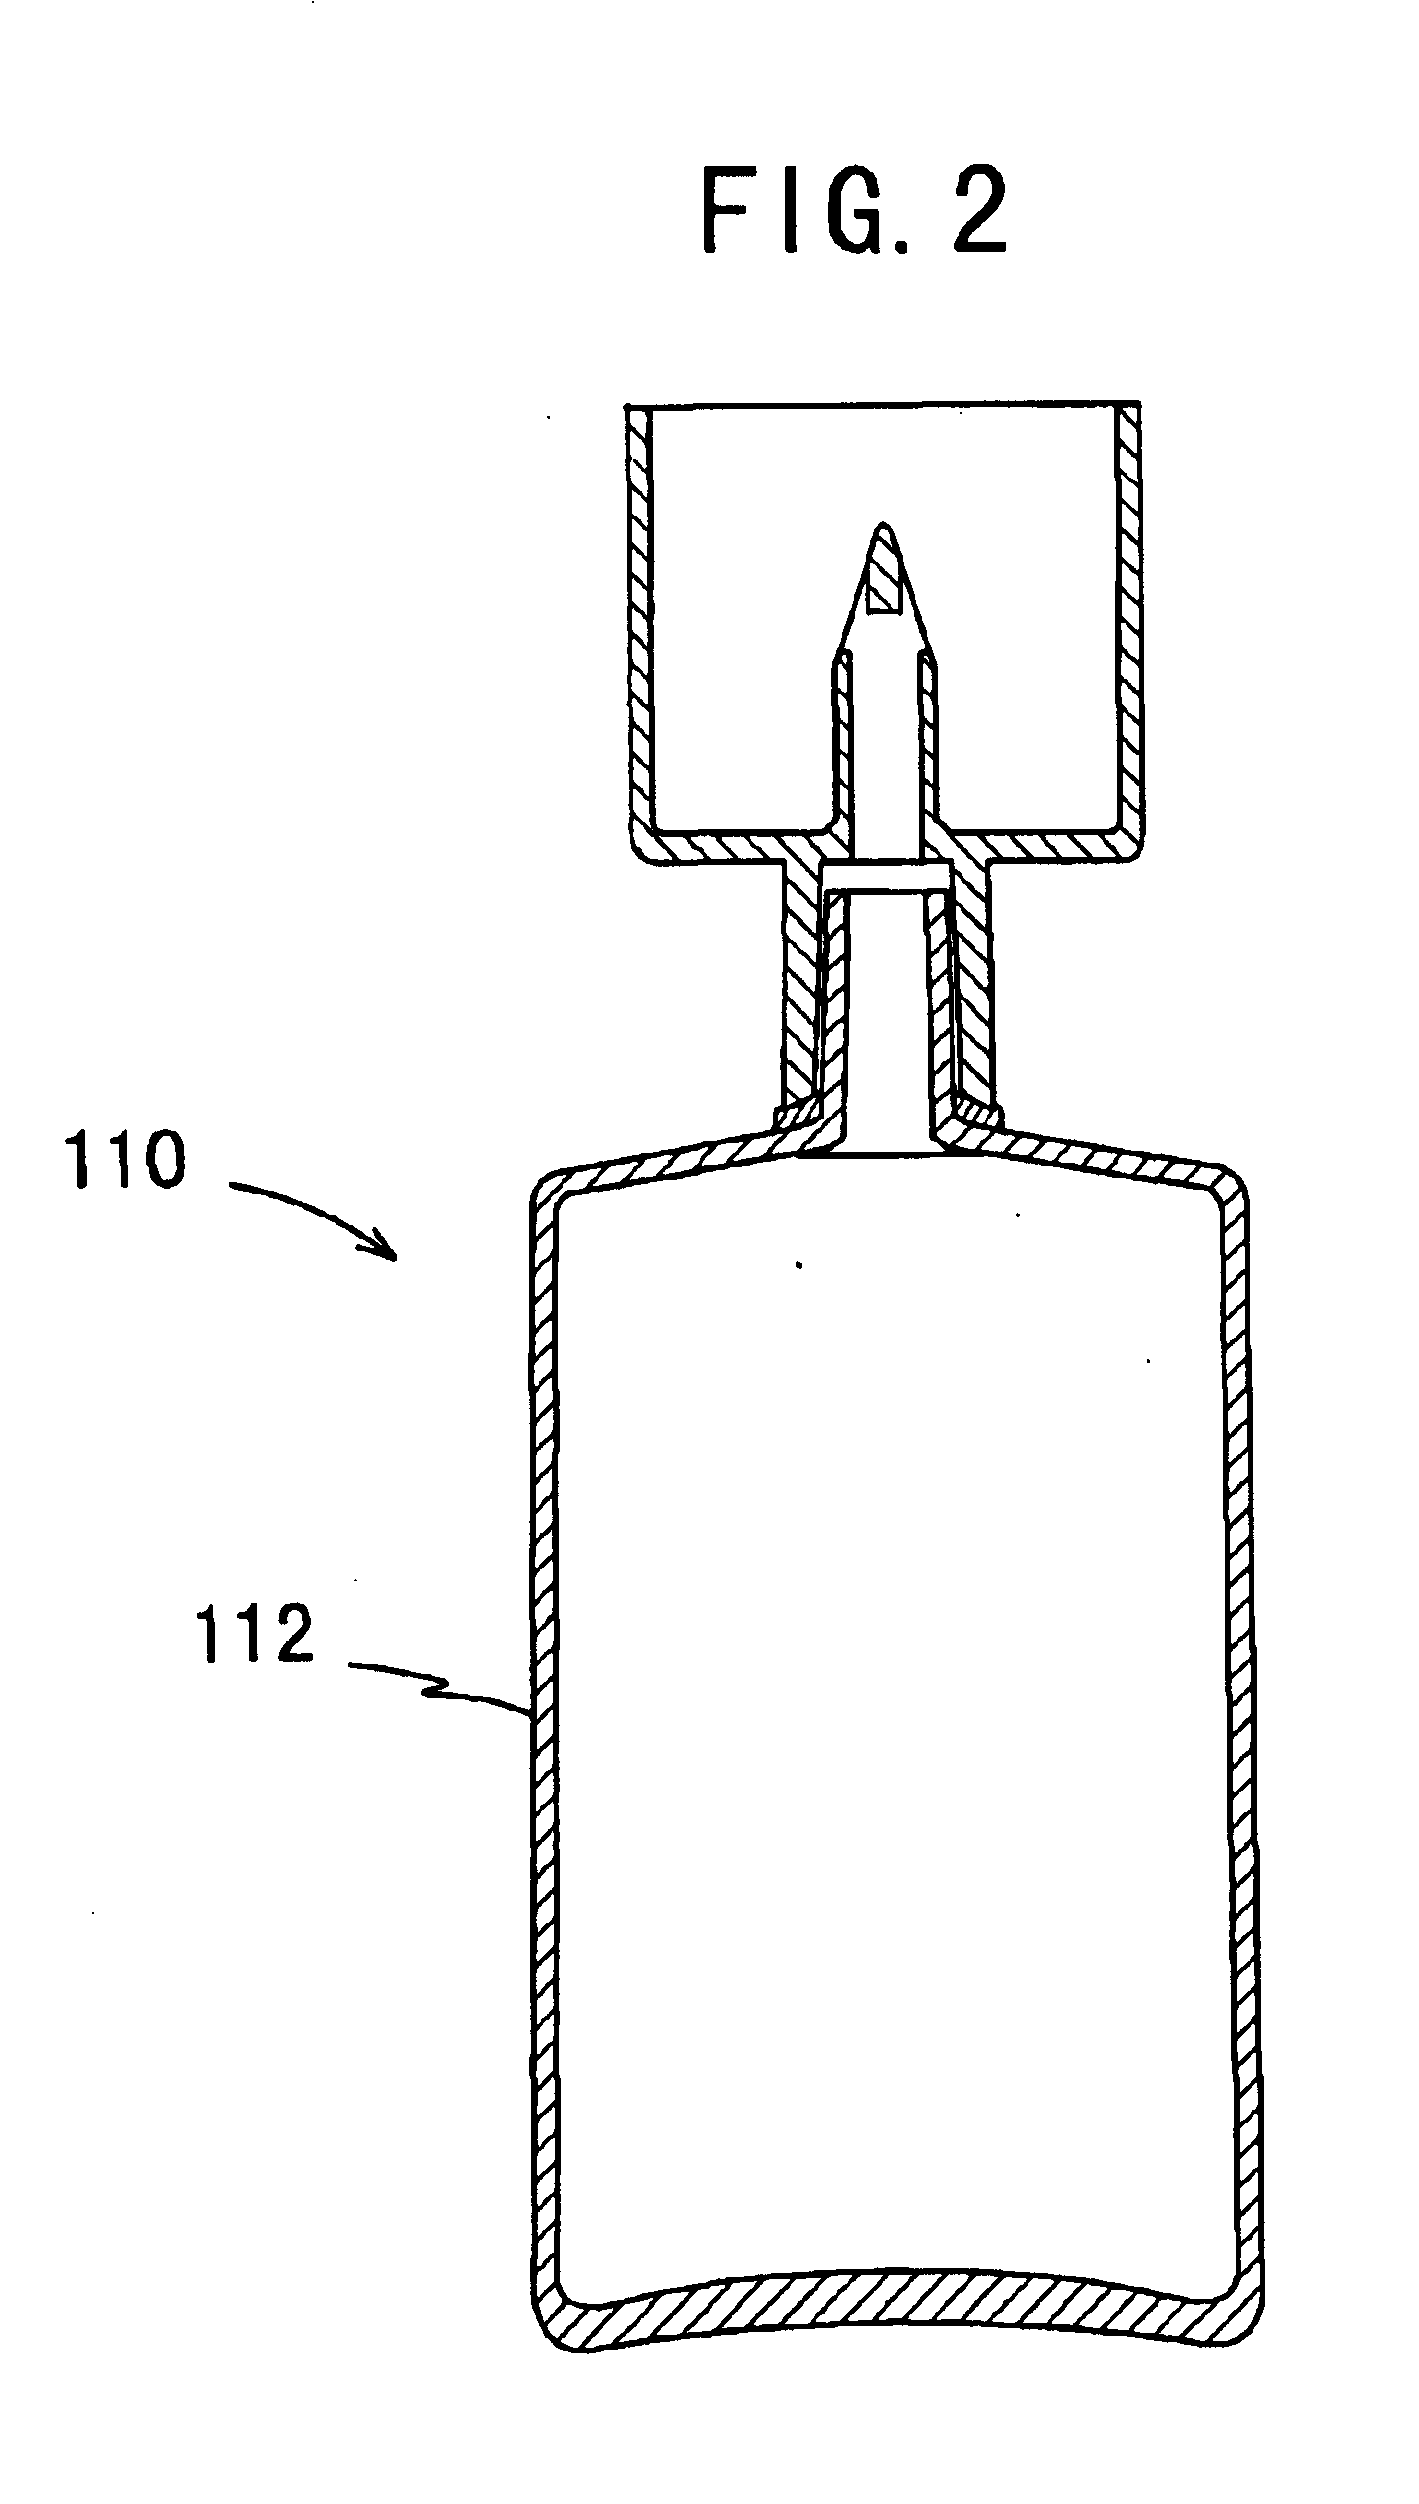 Drug solution container with a connector for communicating